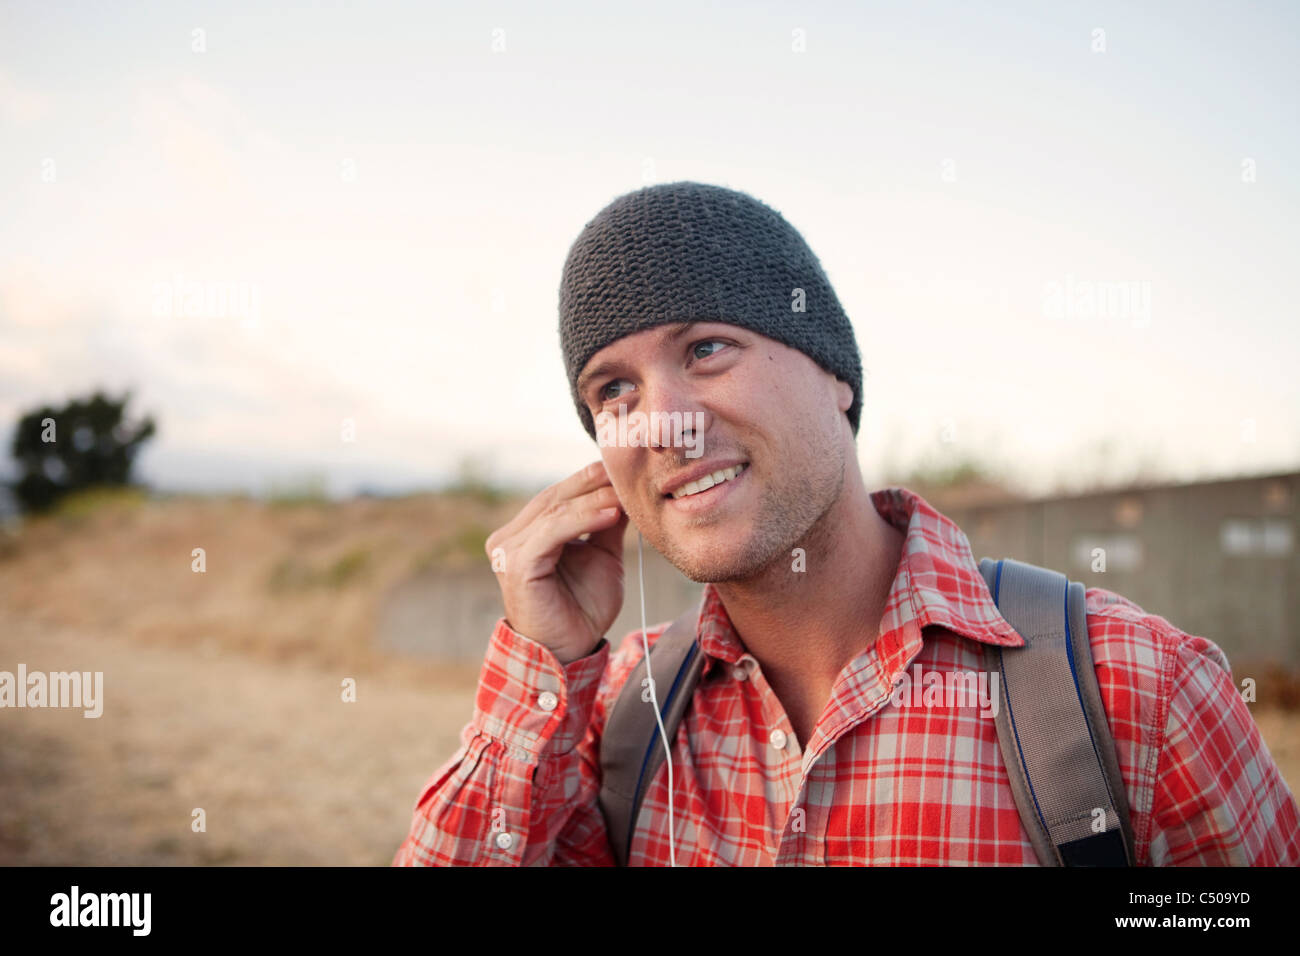 Man putting in earbuds in remote area Stock Photo